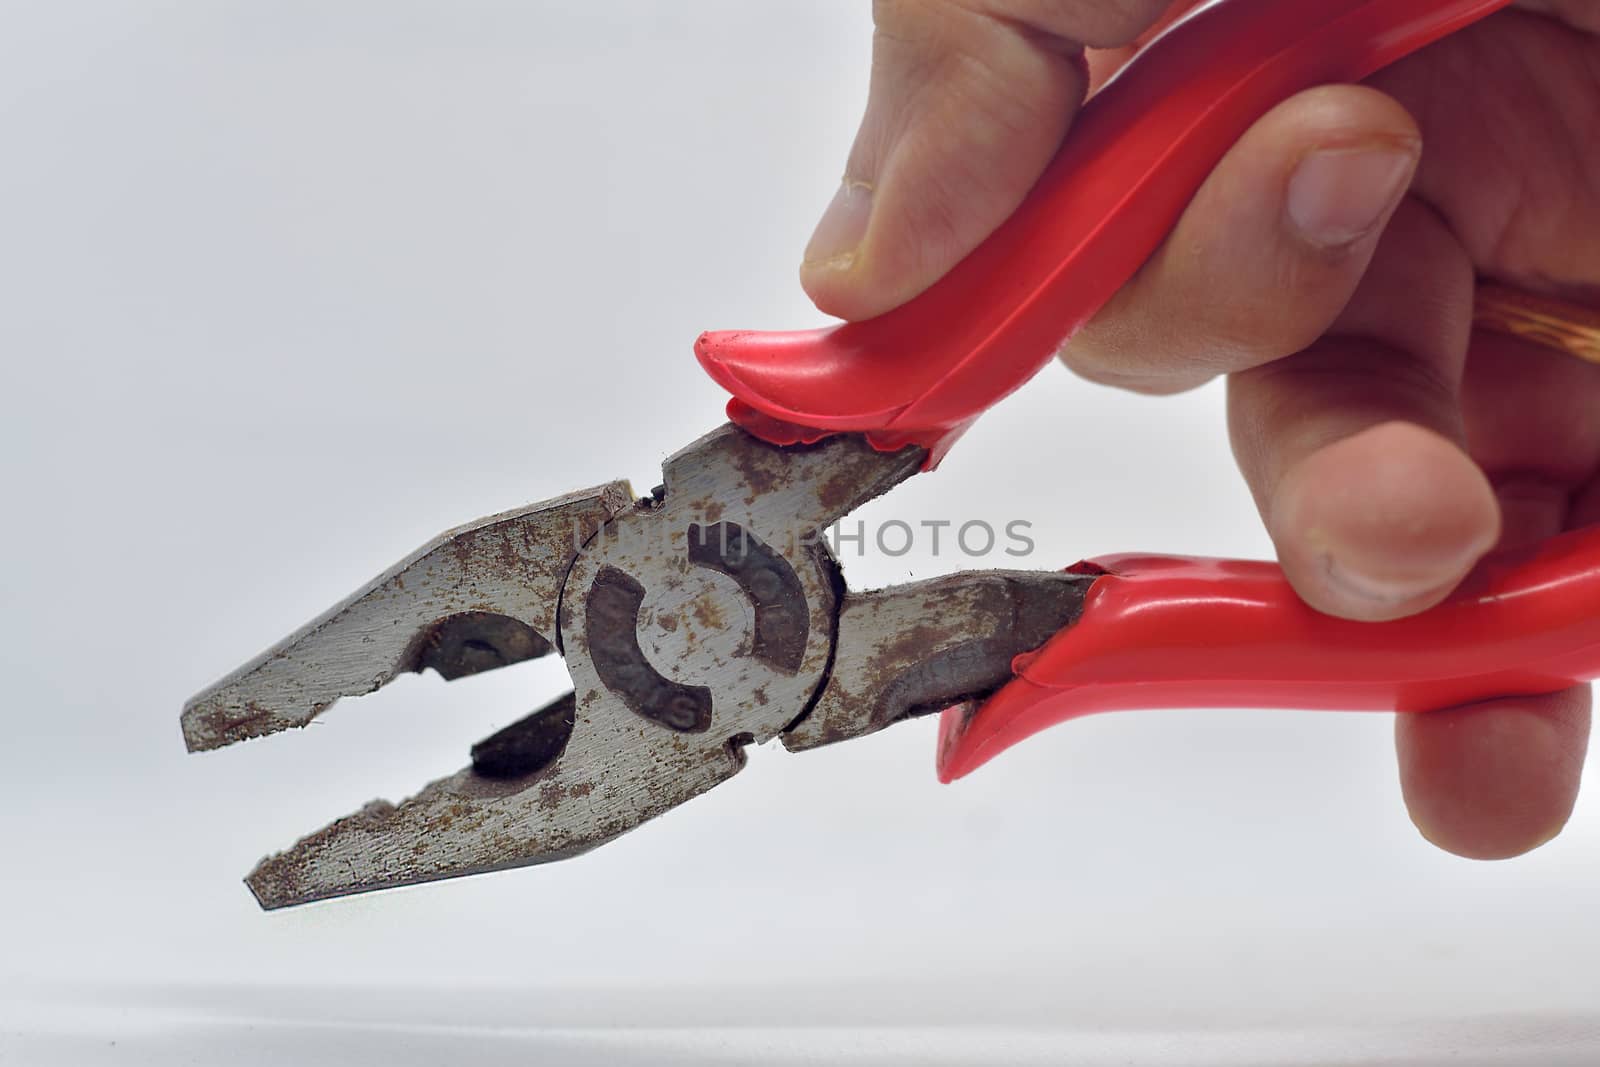 Diagonal cutting pliers are used for cutting wires, screws and nails